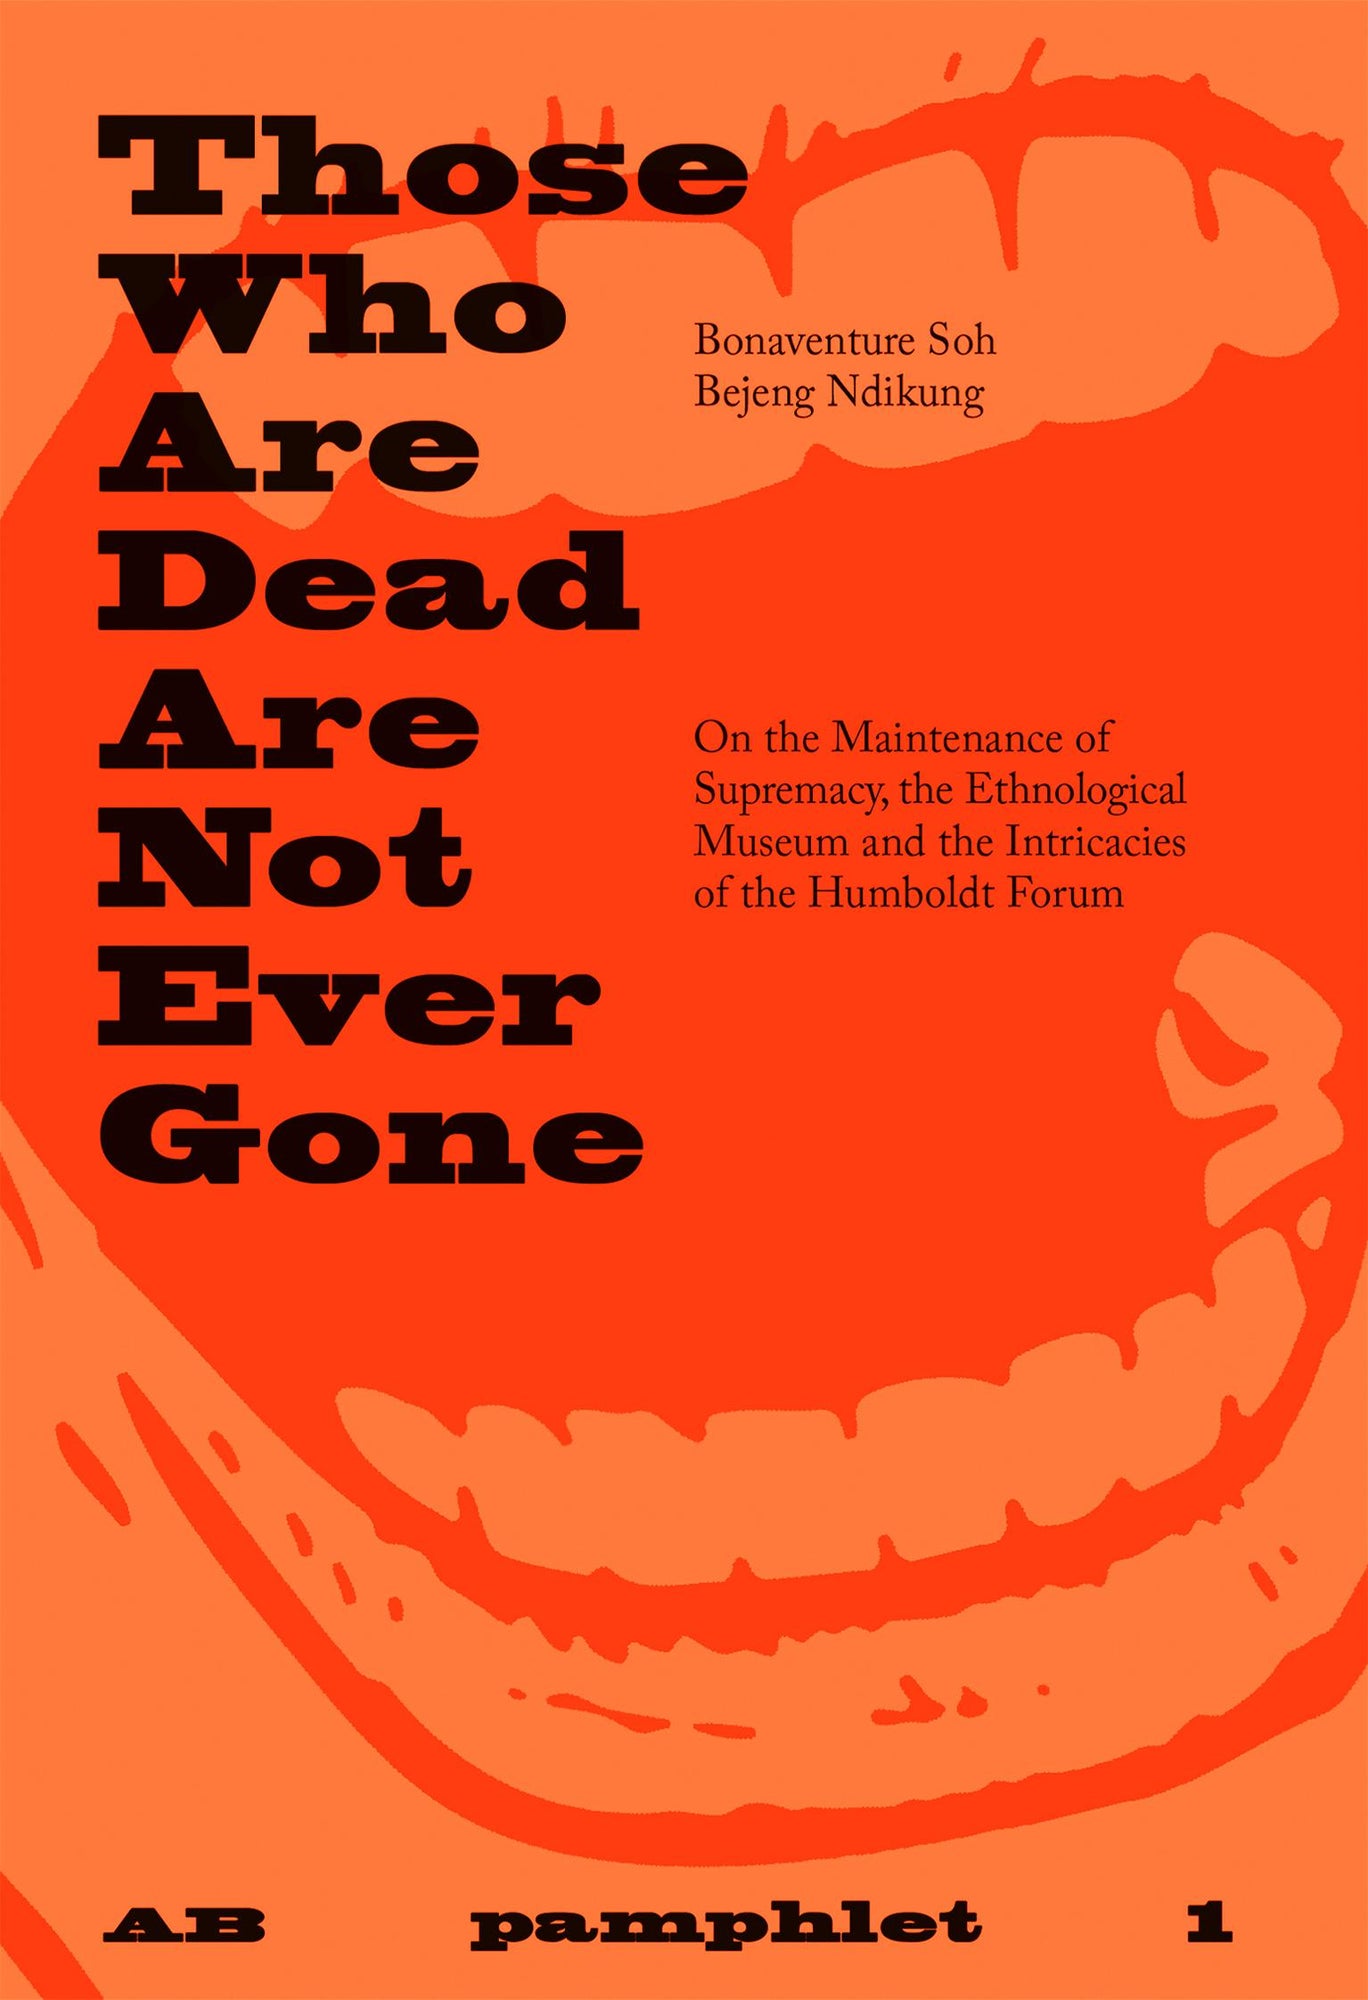 Pamphlet 1: Those who are dead are not gone